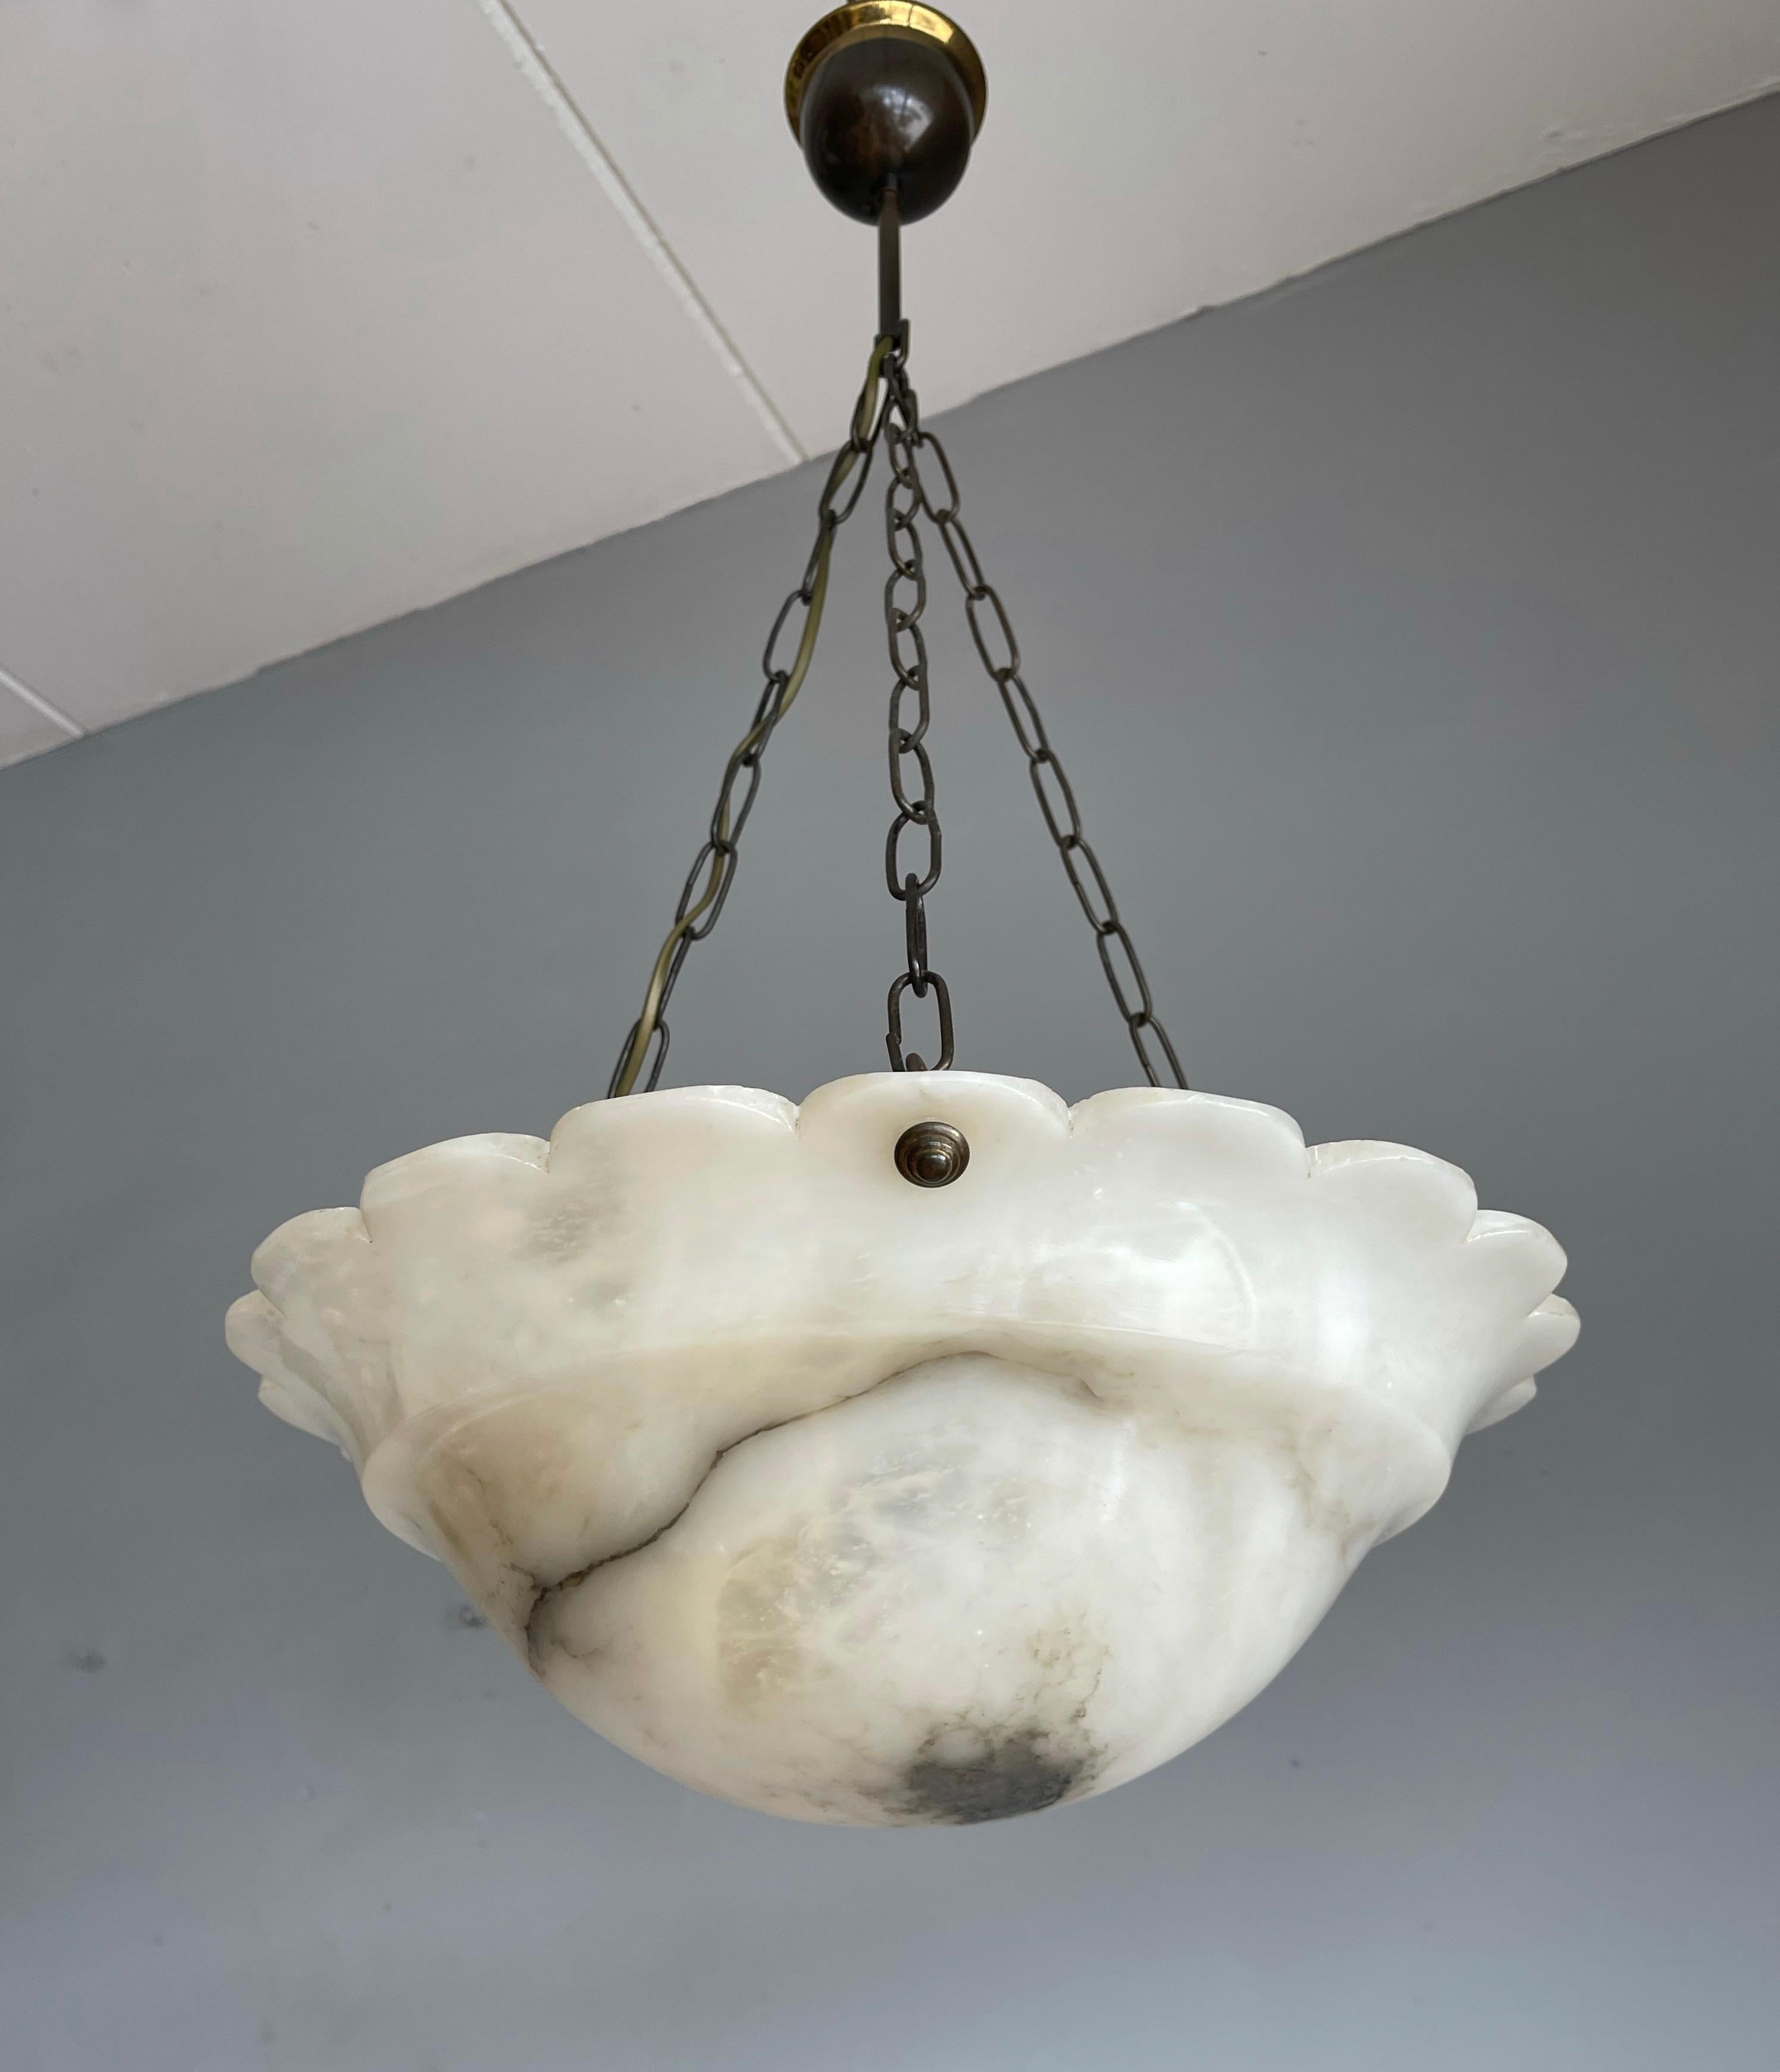 Wonderful and good size Art Deco alabaster pendant in mint condition.

This beautiful sunflower design, top quality Art Deco pendant is both unique in shape and color. Many alabaster pendants are more beige than white, but this example is